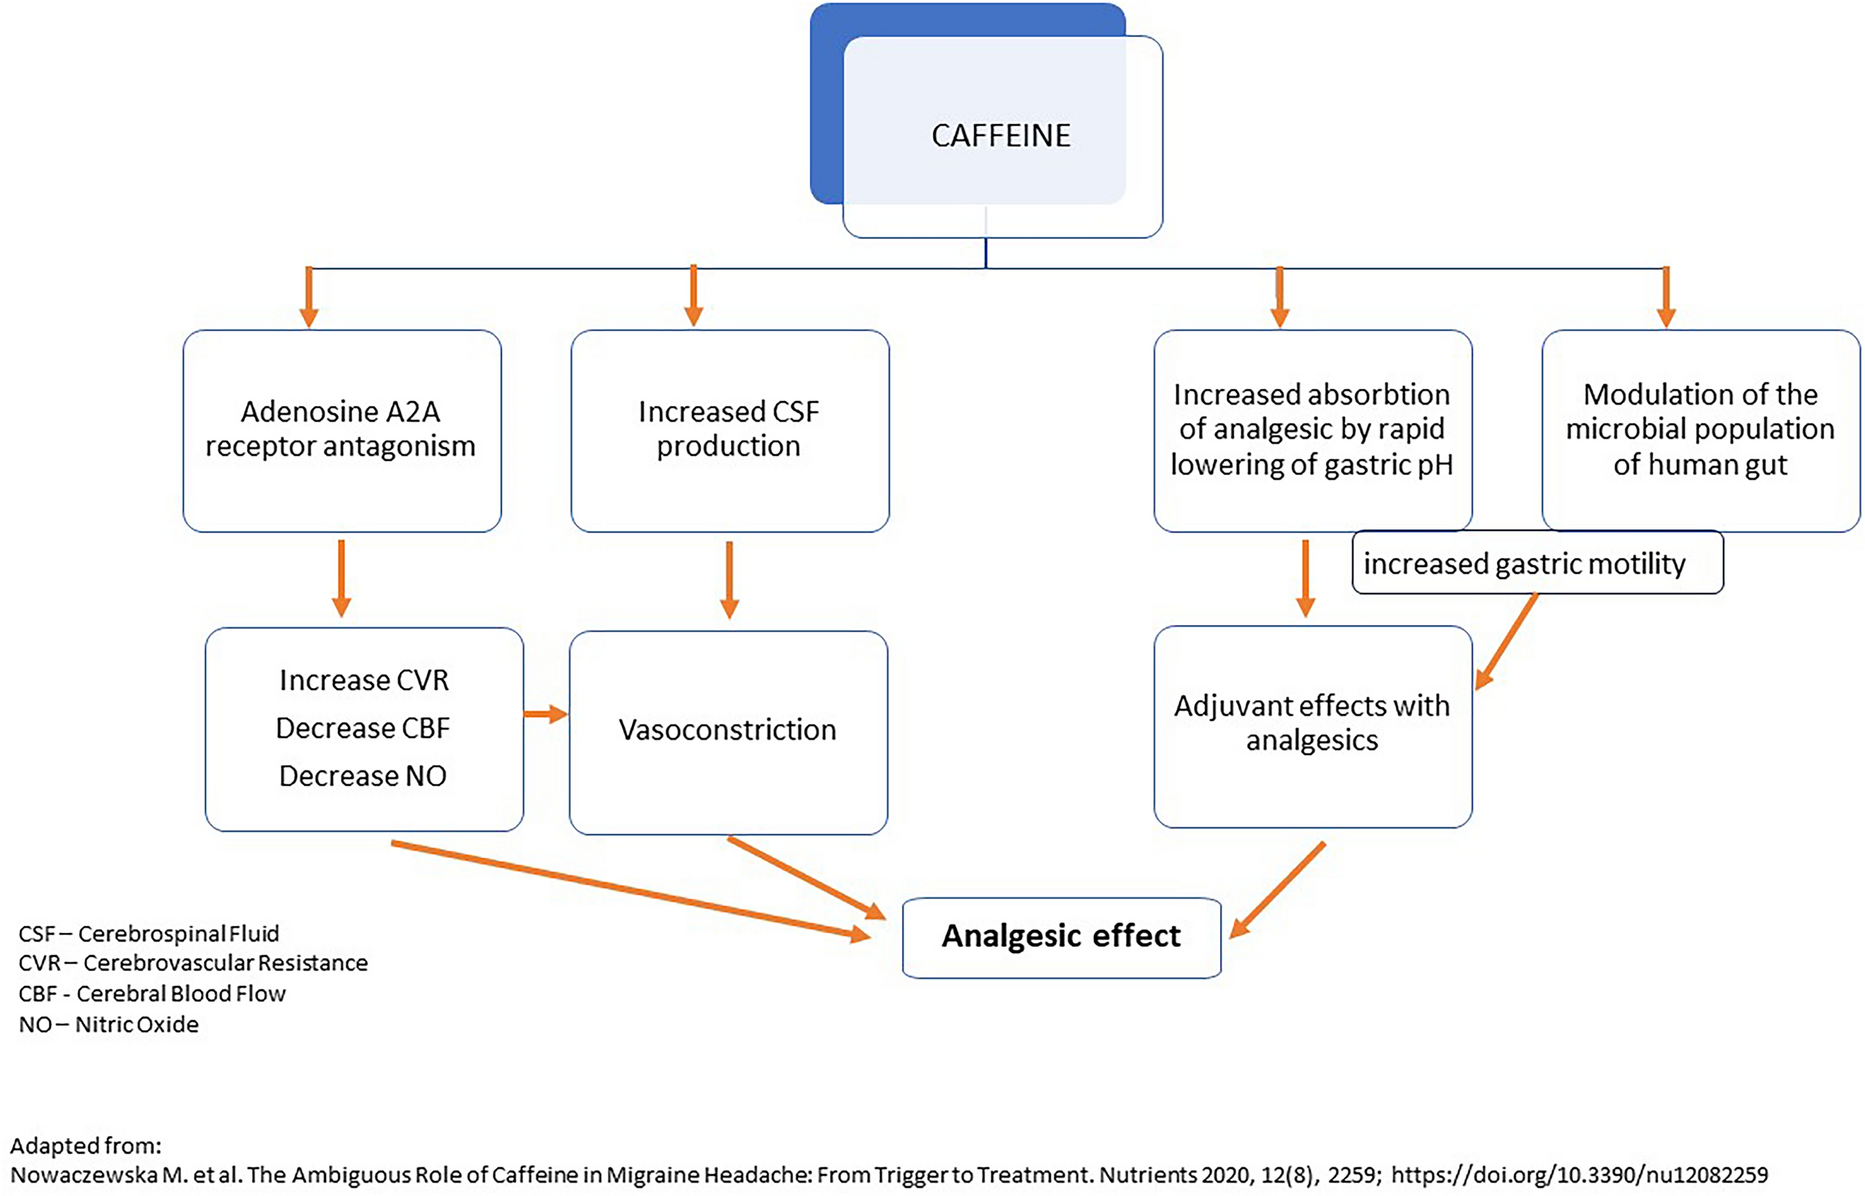 The Role of the Combination Paracetamol/Caffeine in Treatment of Acute Migraine Pain: A Narrative Review